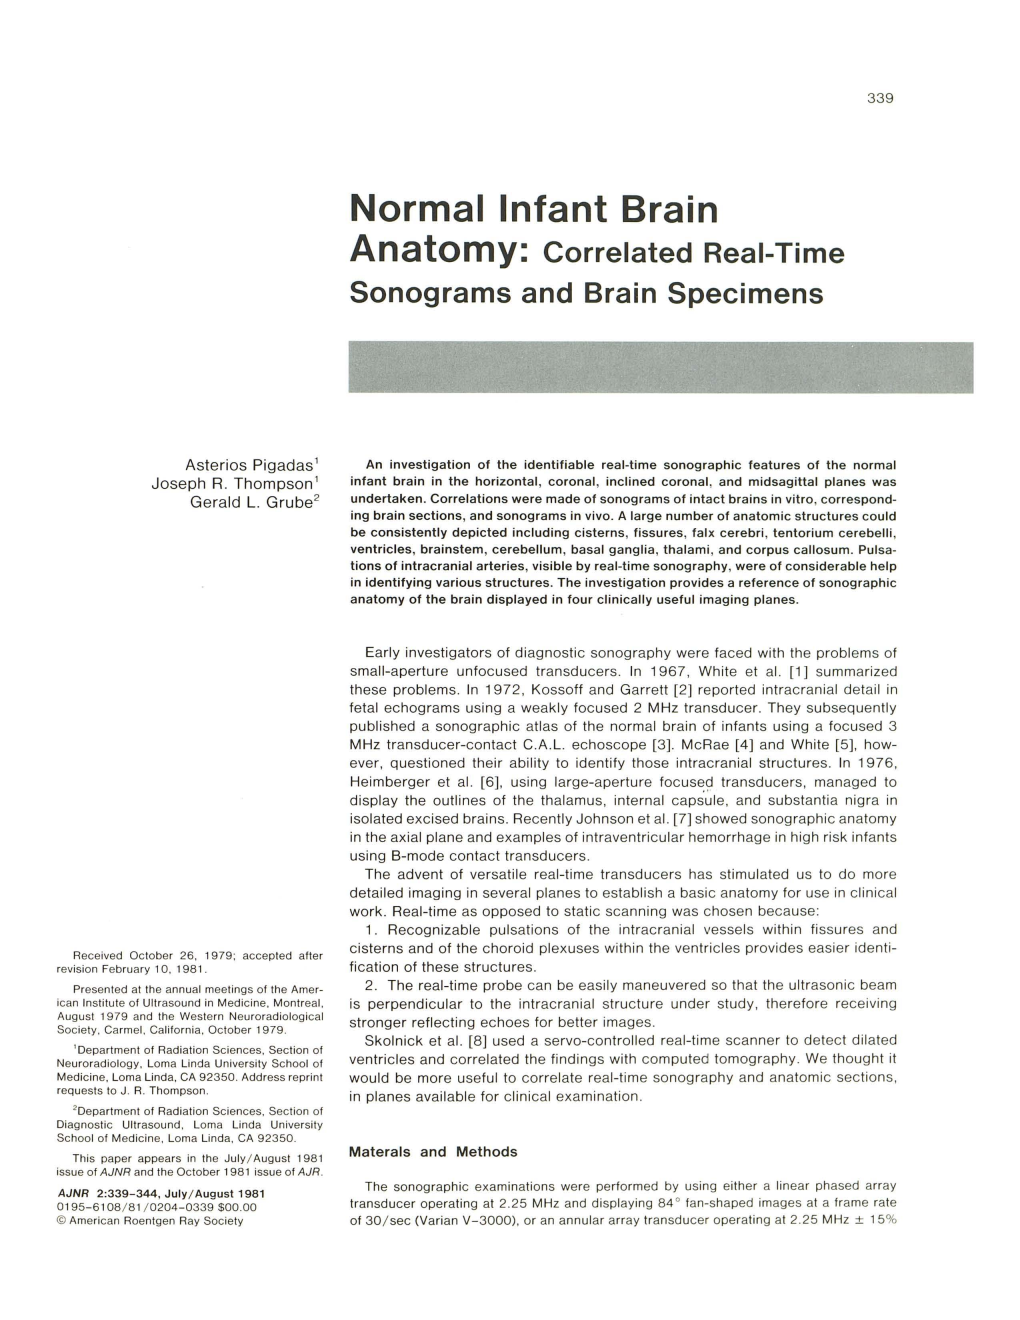 Normal Infant Brain Anatomy: Correlated Real-Time Sonograms and Brain Specimens